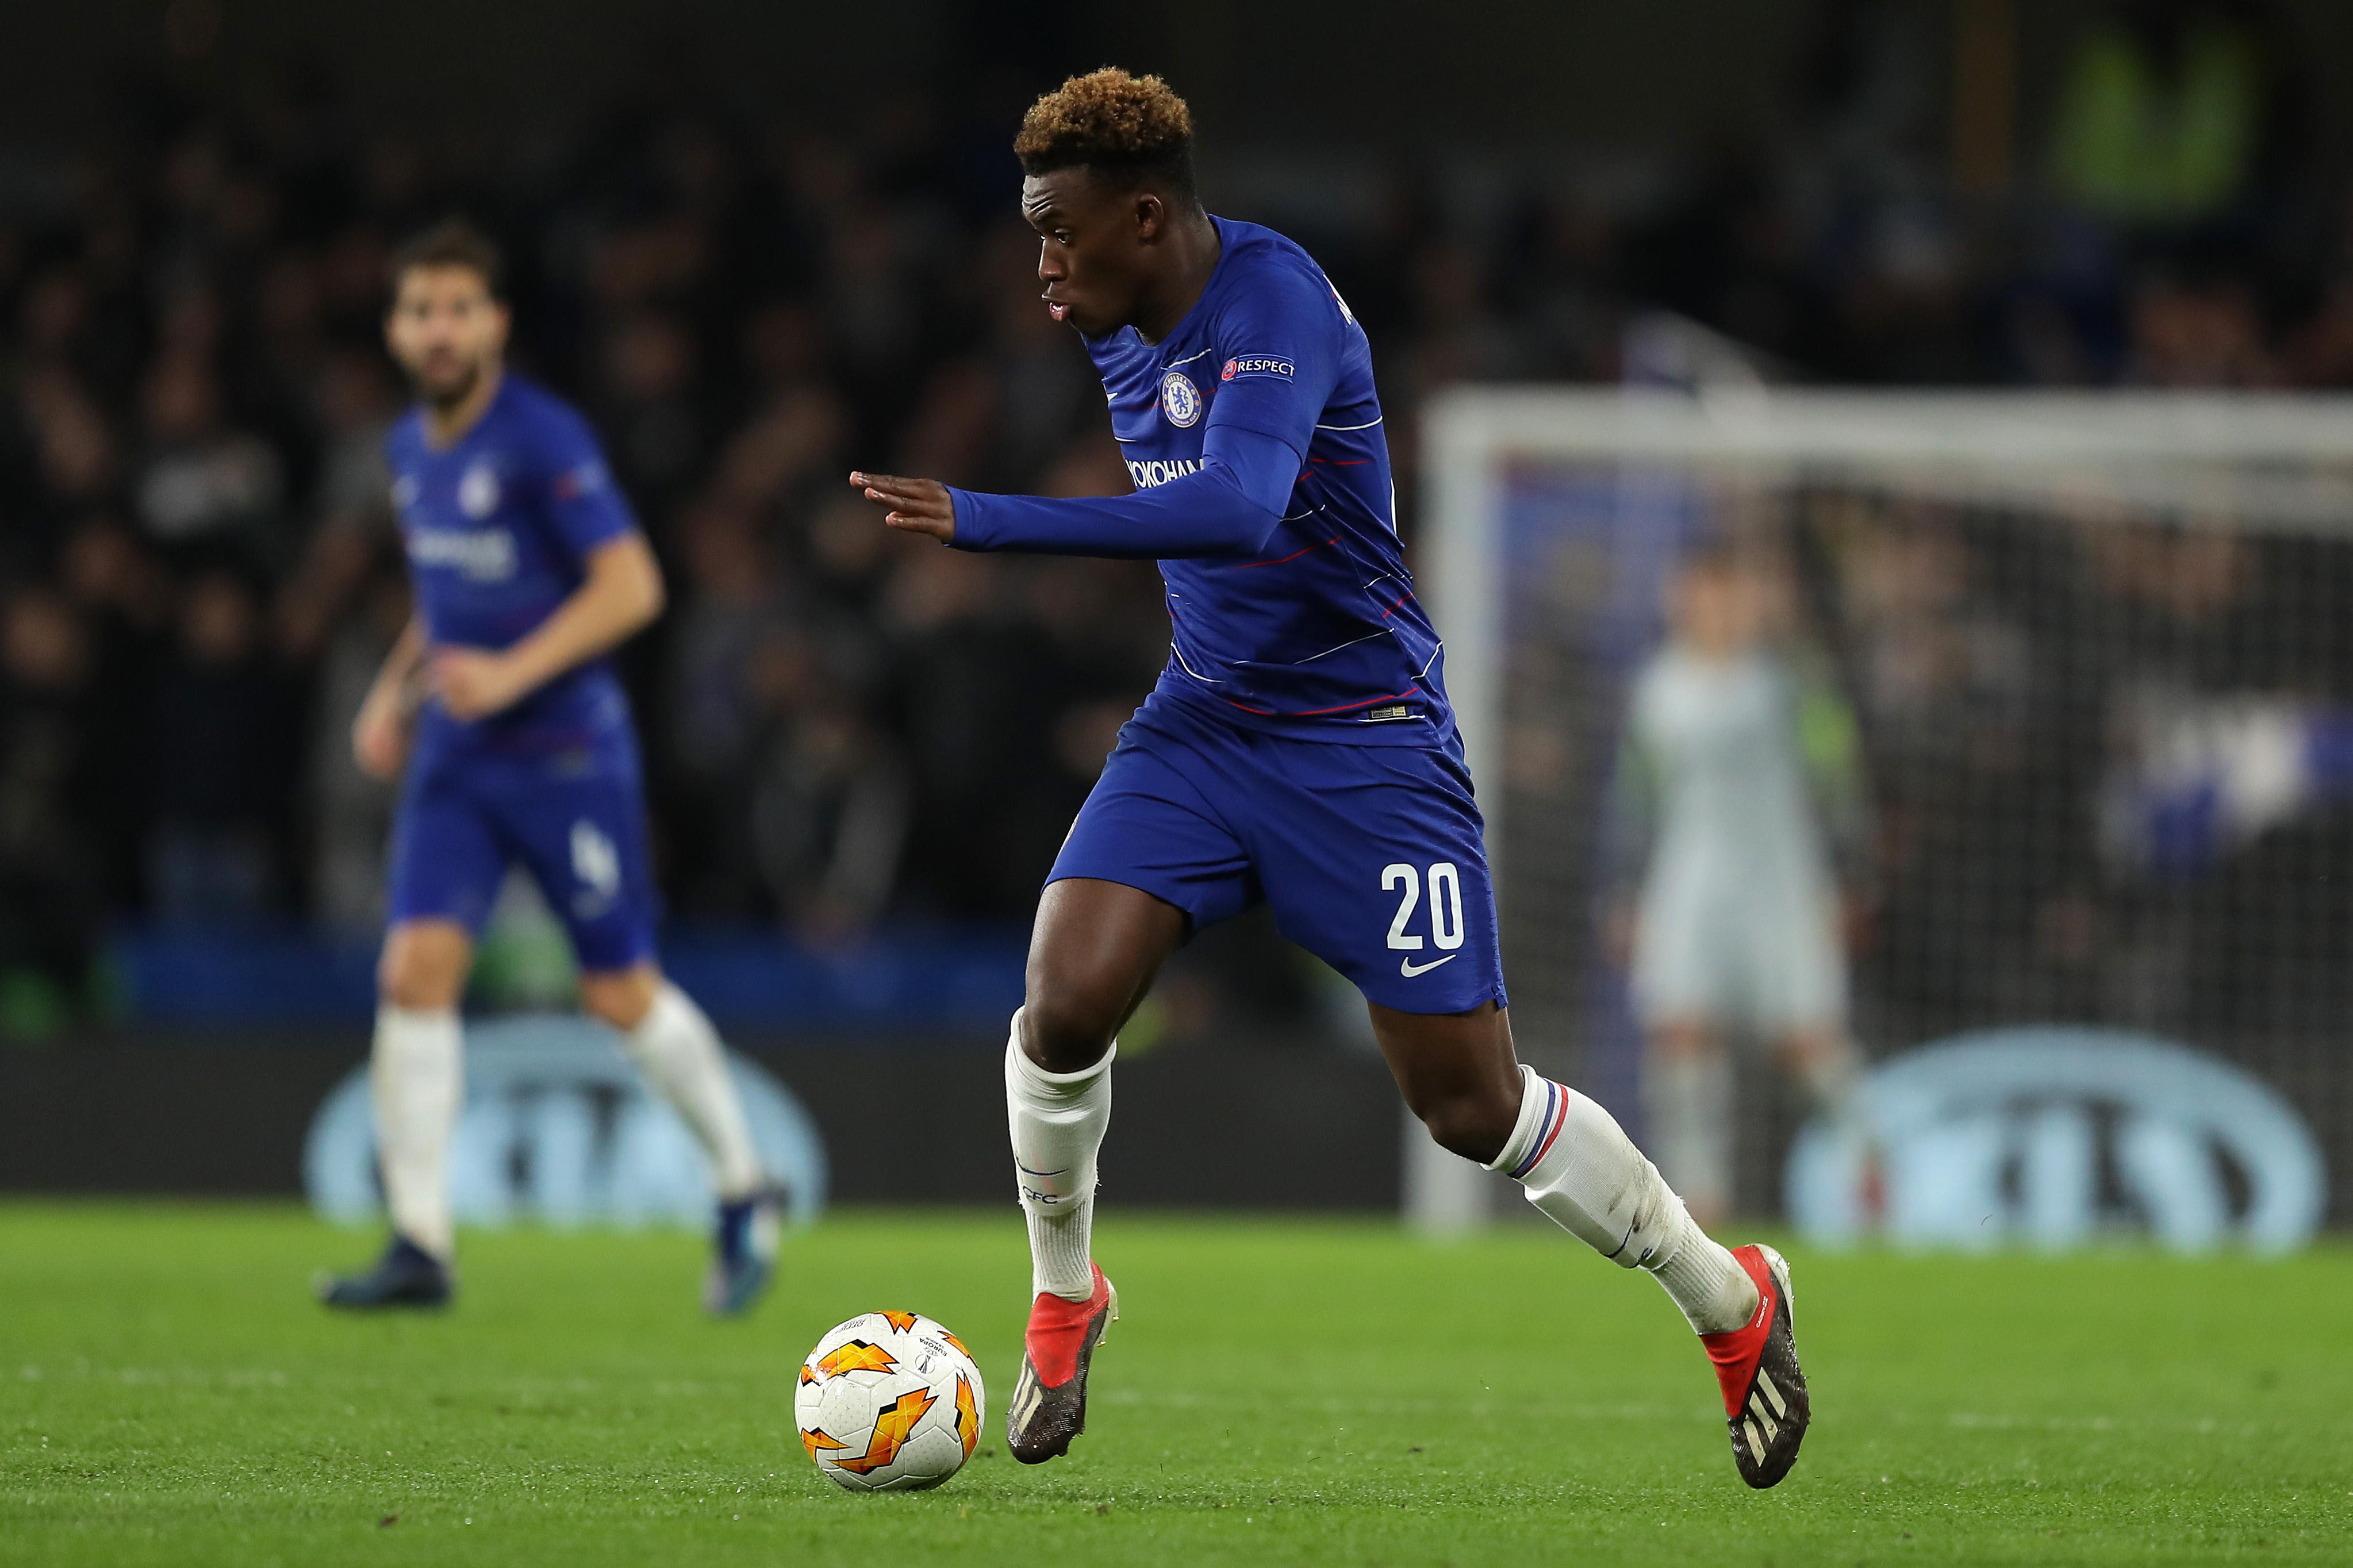 LONDON, ENGLAND - NOVEMBER 29: Callum Hudson-Odoi of Chelsea in action during the UEFA Europa League Group L match between Chelsea and PAOK at Stamford Bridge on November 29, 2018 in London, United Kingdom.  (Photo by Richard Heathcote/Getty Images)